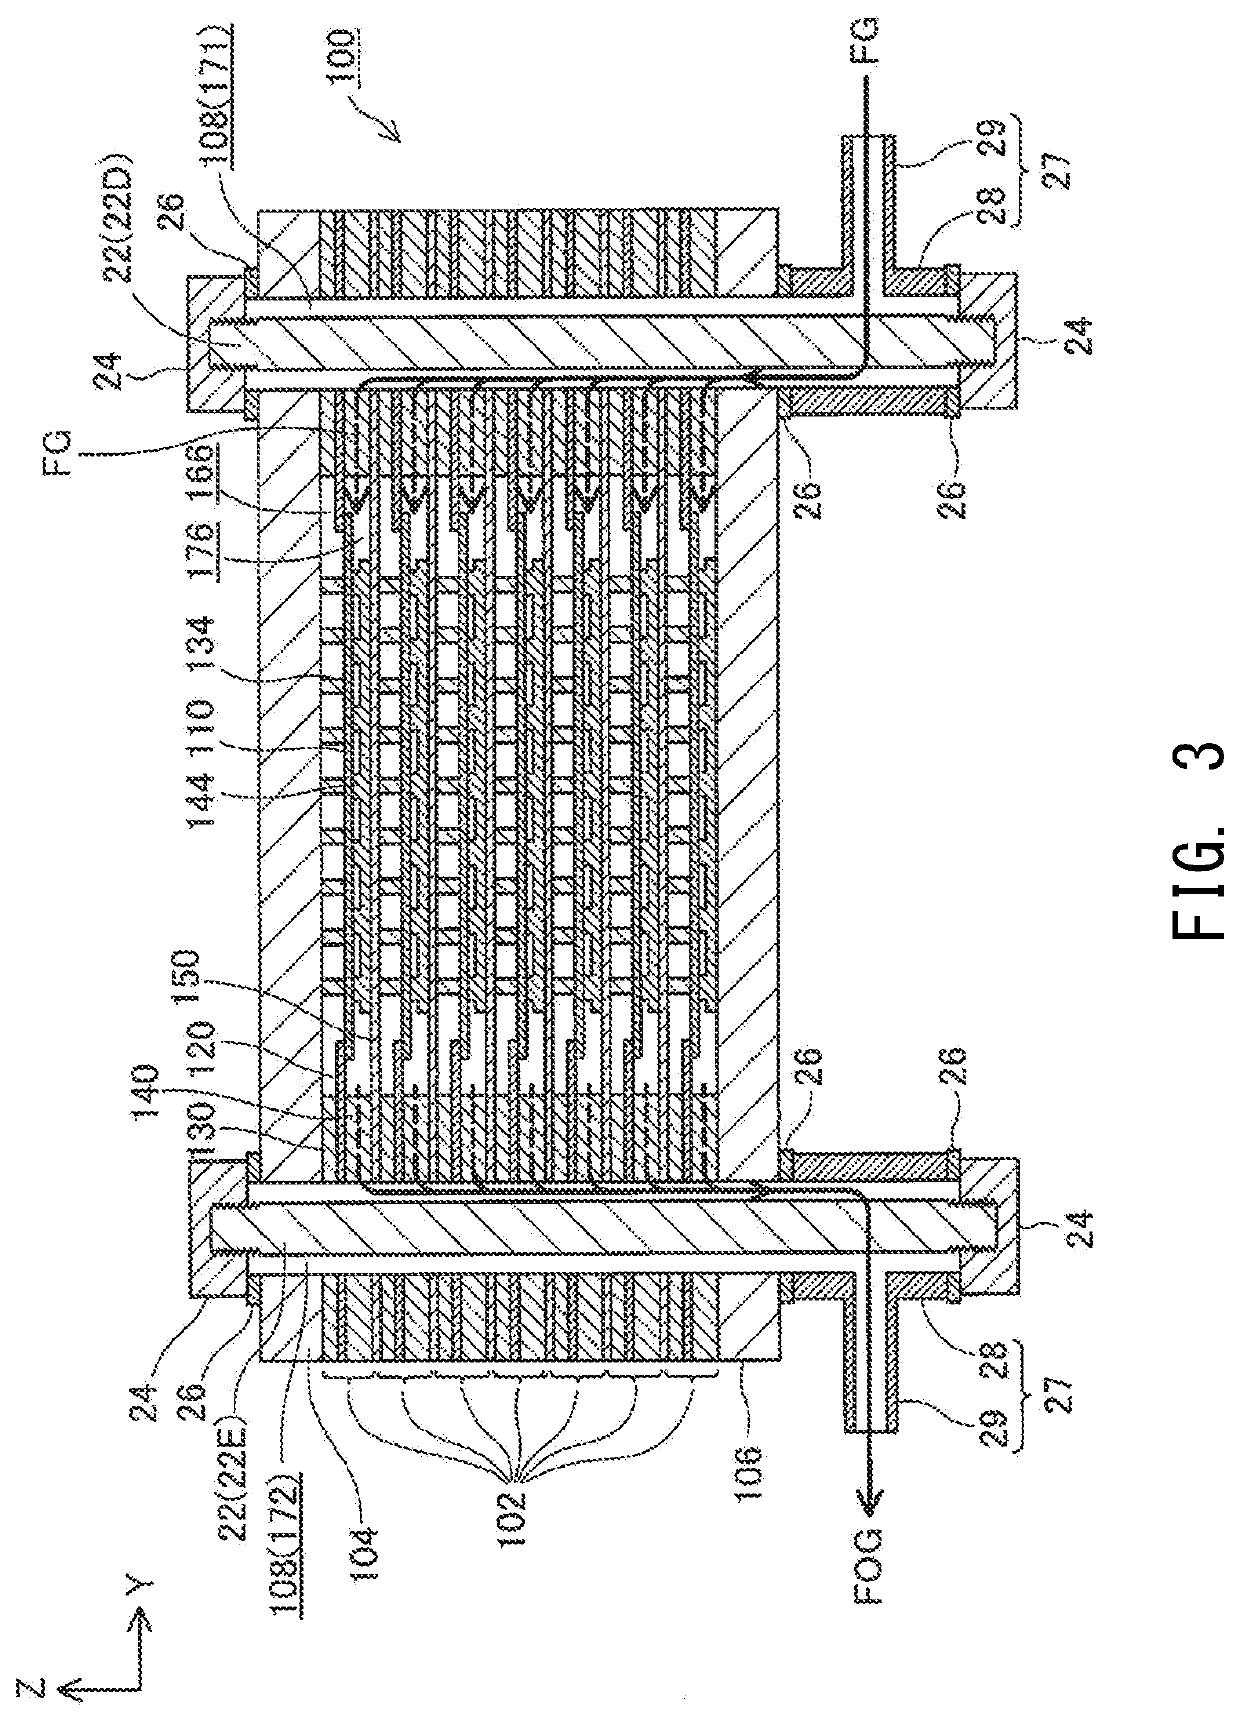 Electrochemical reaction single cell and electrochemical reaction cell stack